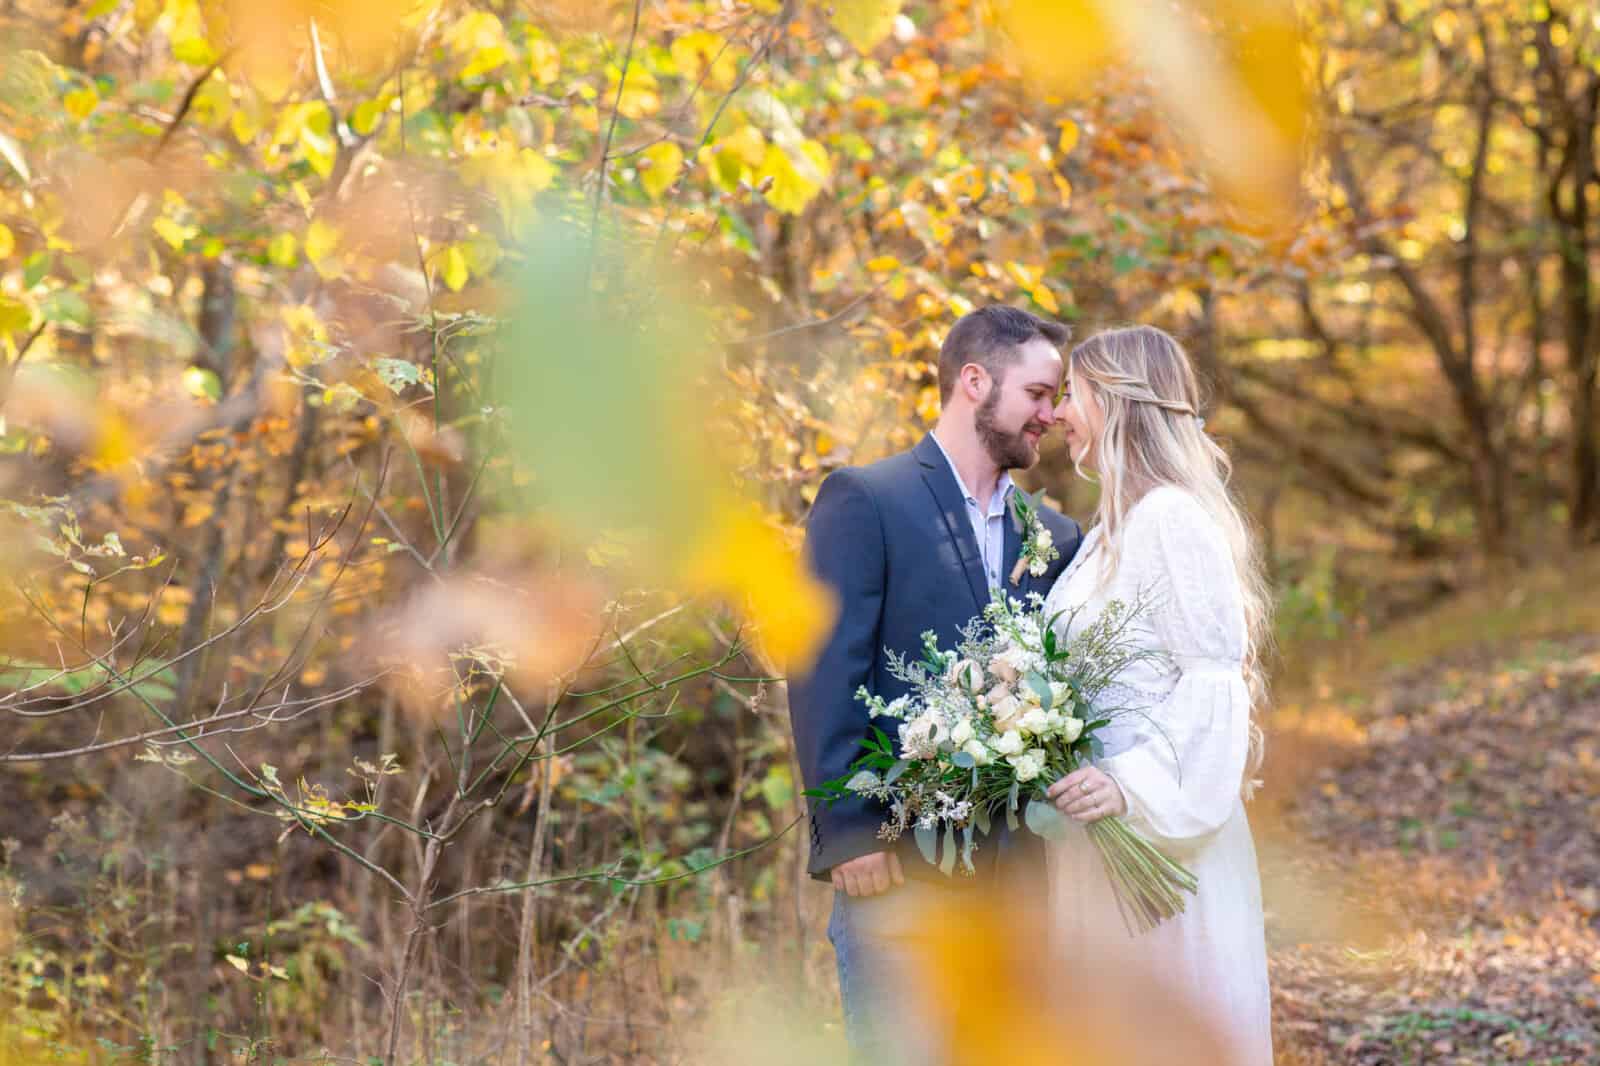 Boho blonde bride with bouquet and groom snuggle in yellow autumn leaves